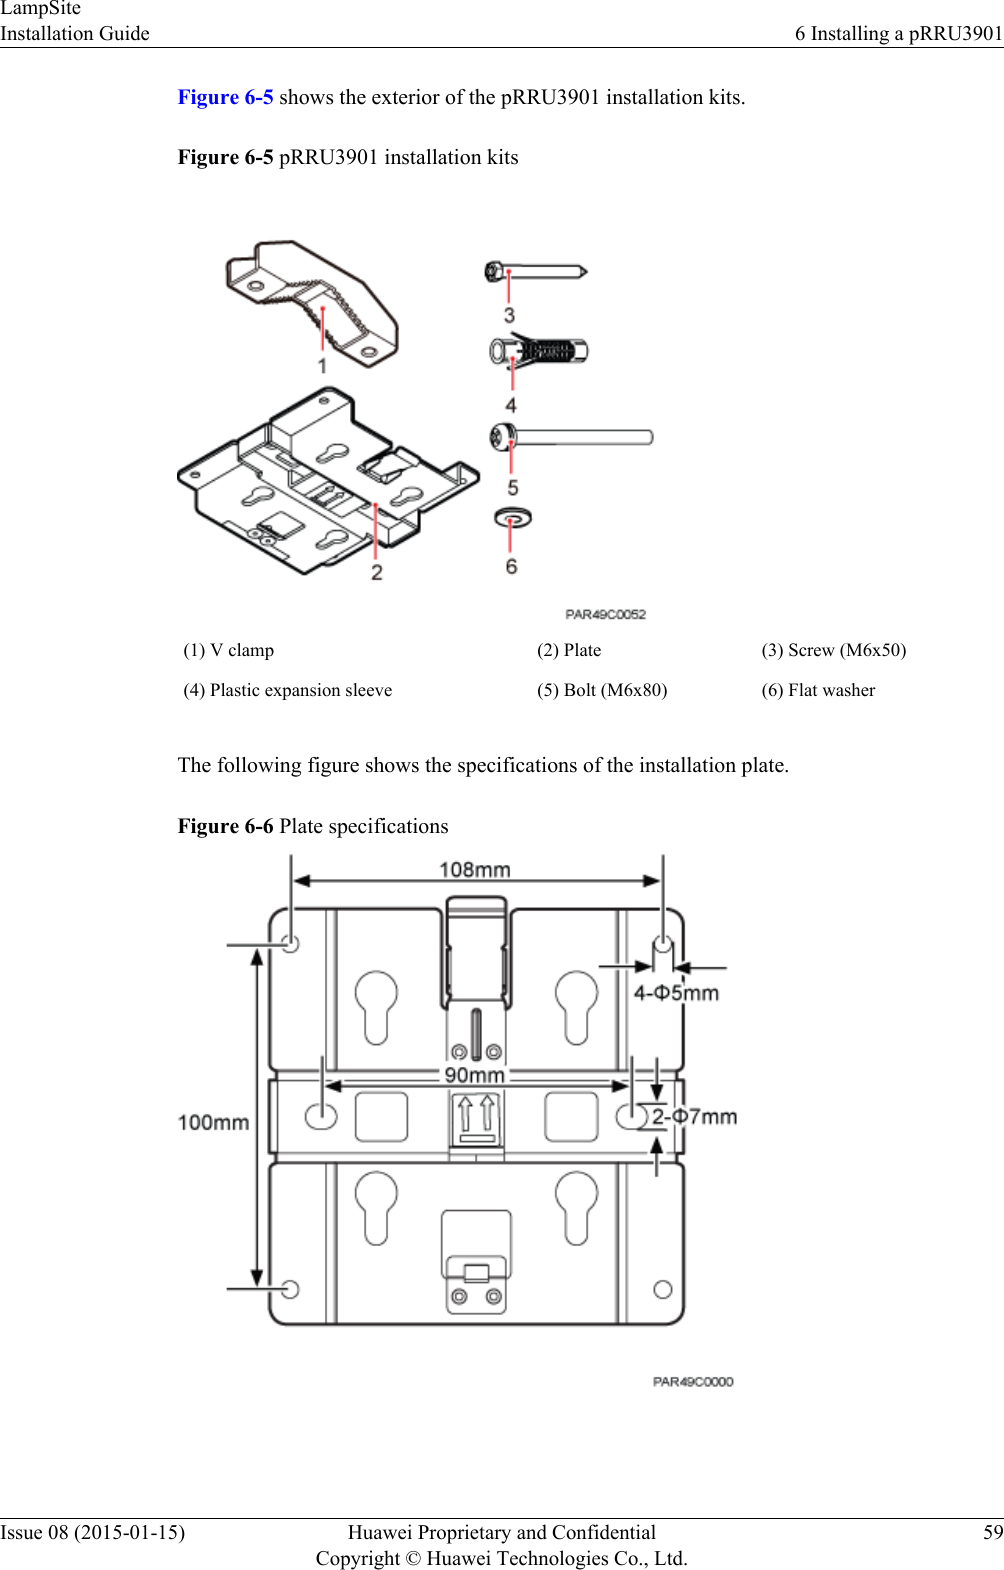 Figure 6-5 shows the exterior of the pRRU3901 installation kits.Figure 6-5 pRRU3901 installation kits(1) V clamp (2) Plate (3) Screw (M6x50)(4) Plastic expansion sleeve (5) Bolt (M6x80) (6) Flat washerThe following figure shows the specifications of the installation plate.Figure 6-6 Plate specificationsLampSiteInstallation Guide 6 Installing a pRRU3901Issue 08 (2015-01-15) Huawei Proprietary and ConfidentialCopyright © Huawei Technologies Co., Ltd.59